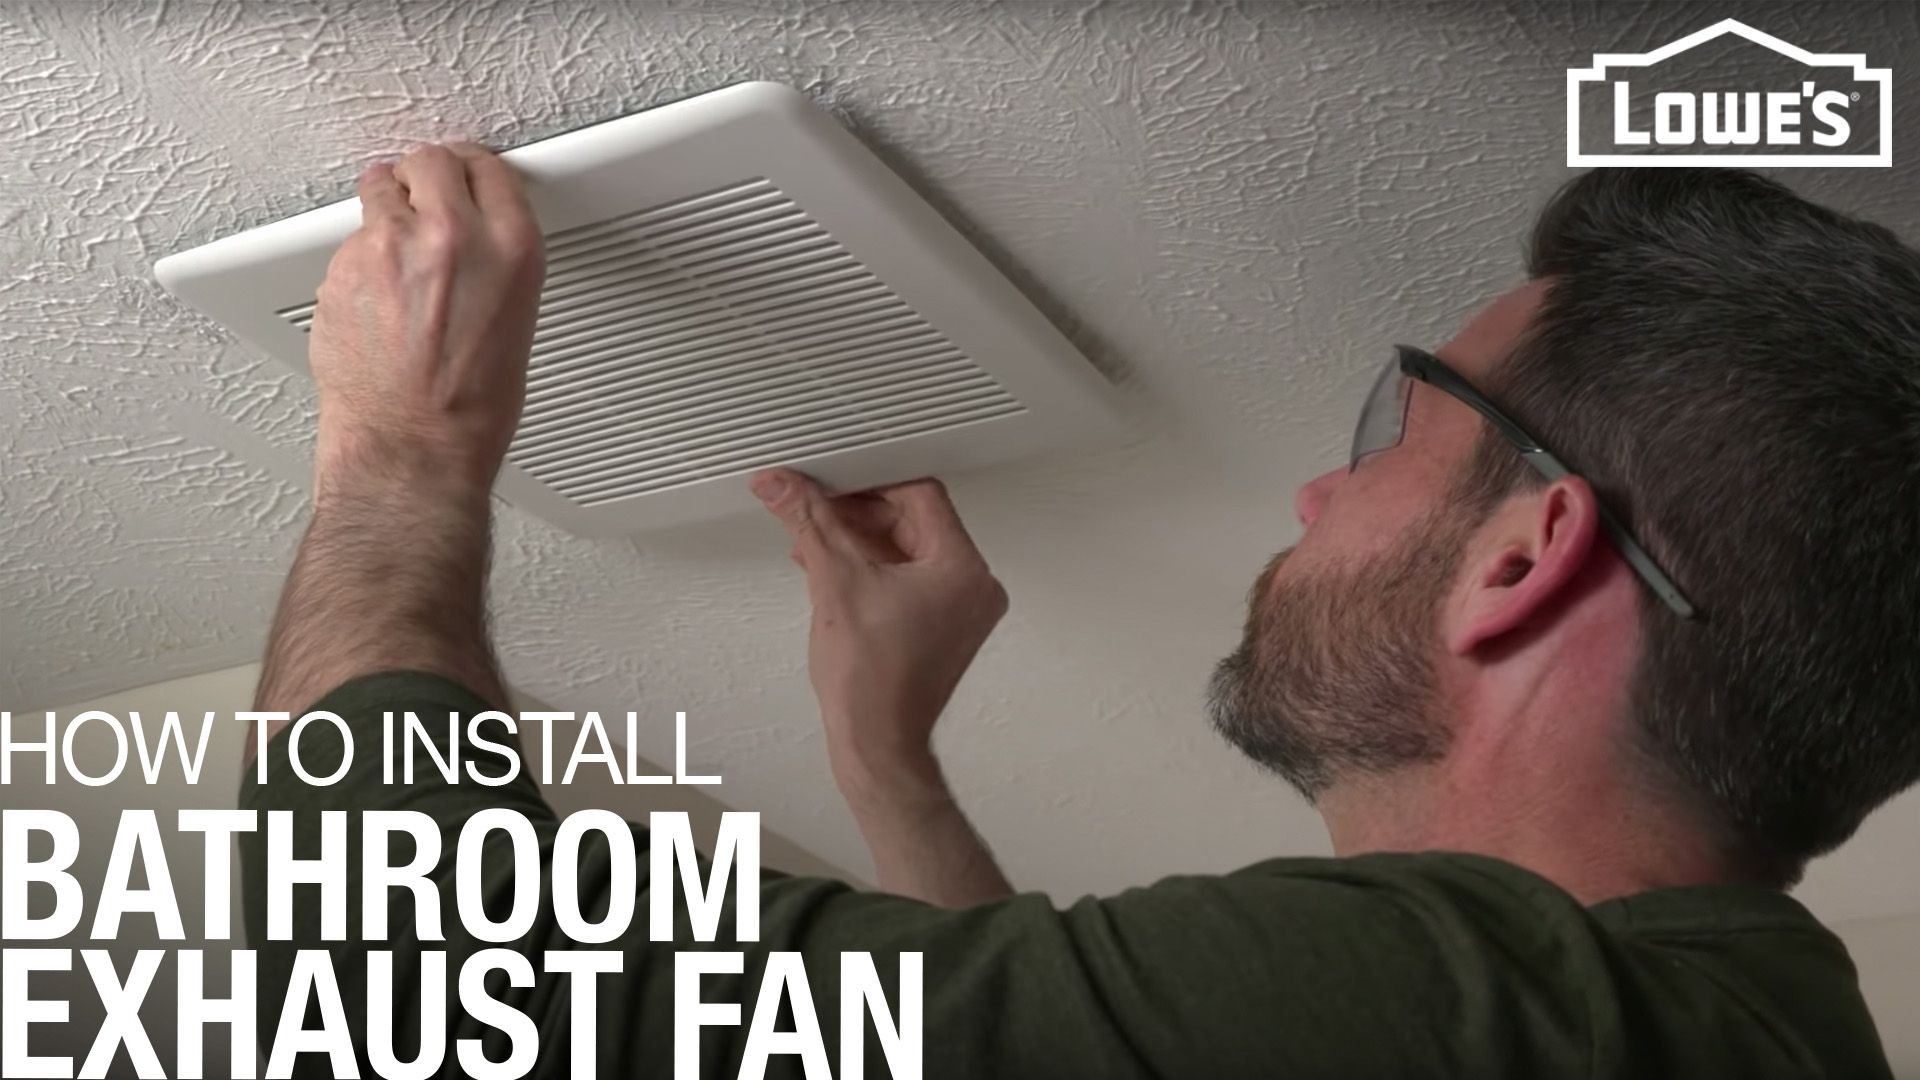 Installing A Bathroom Exhaust Fan Awesome Install A Bathroom Exhaust Fan